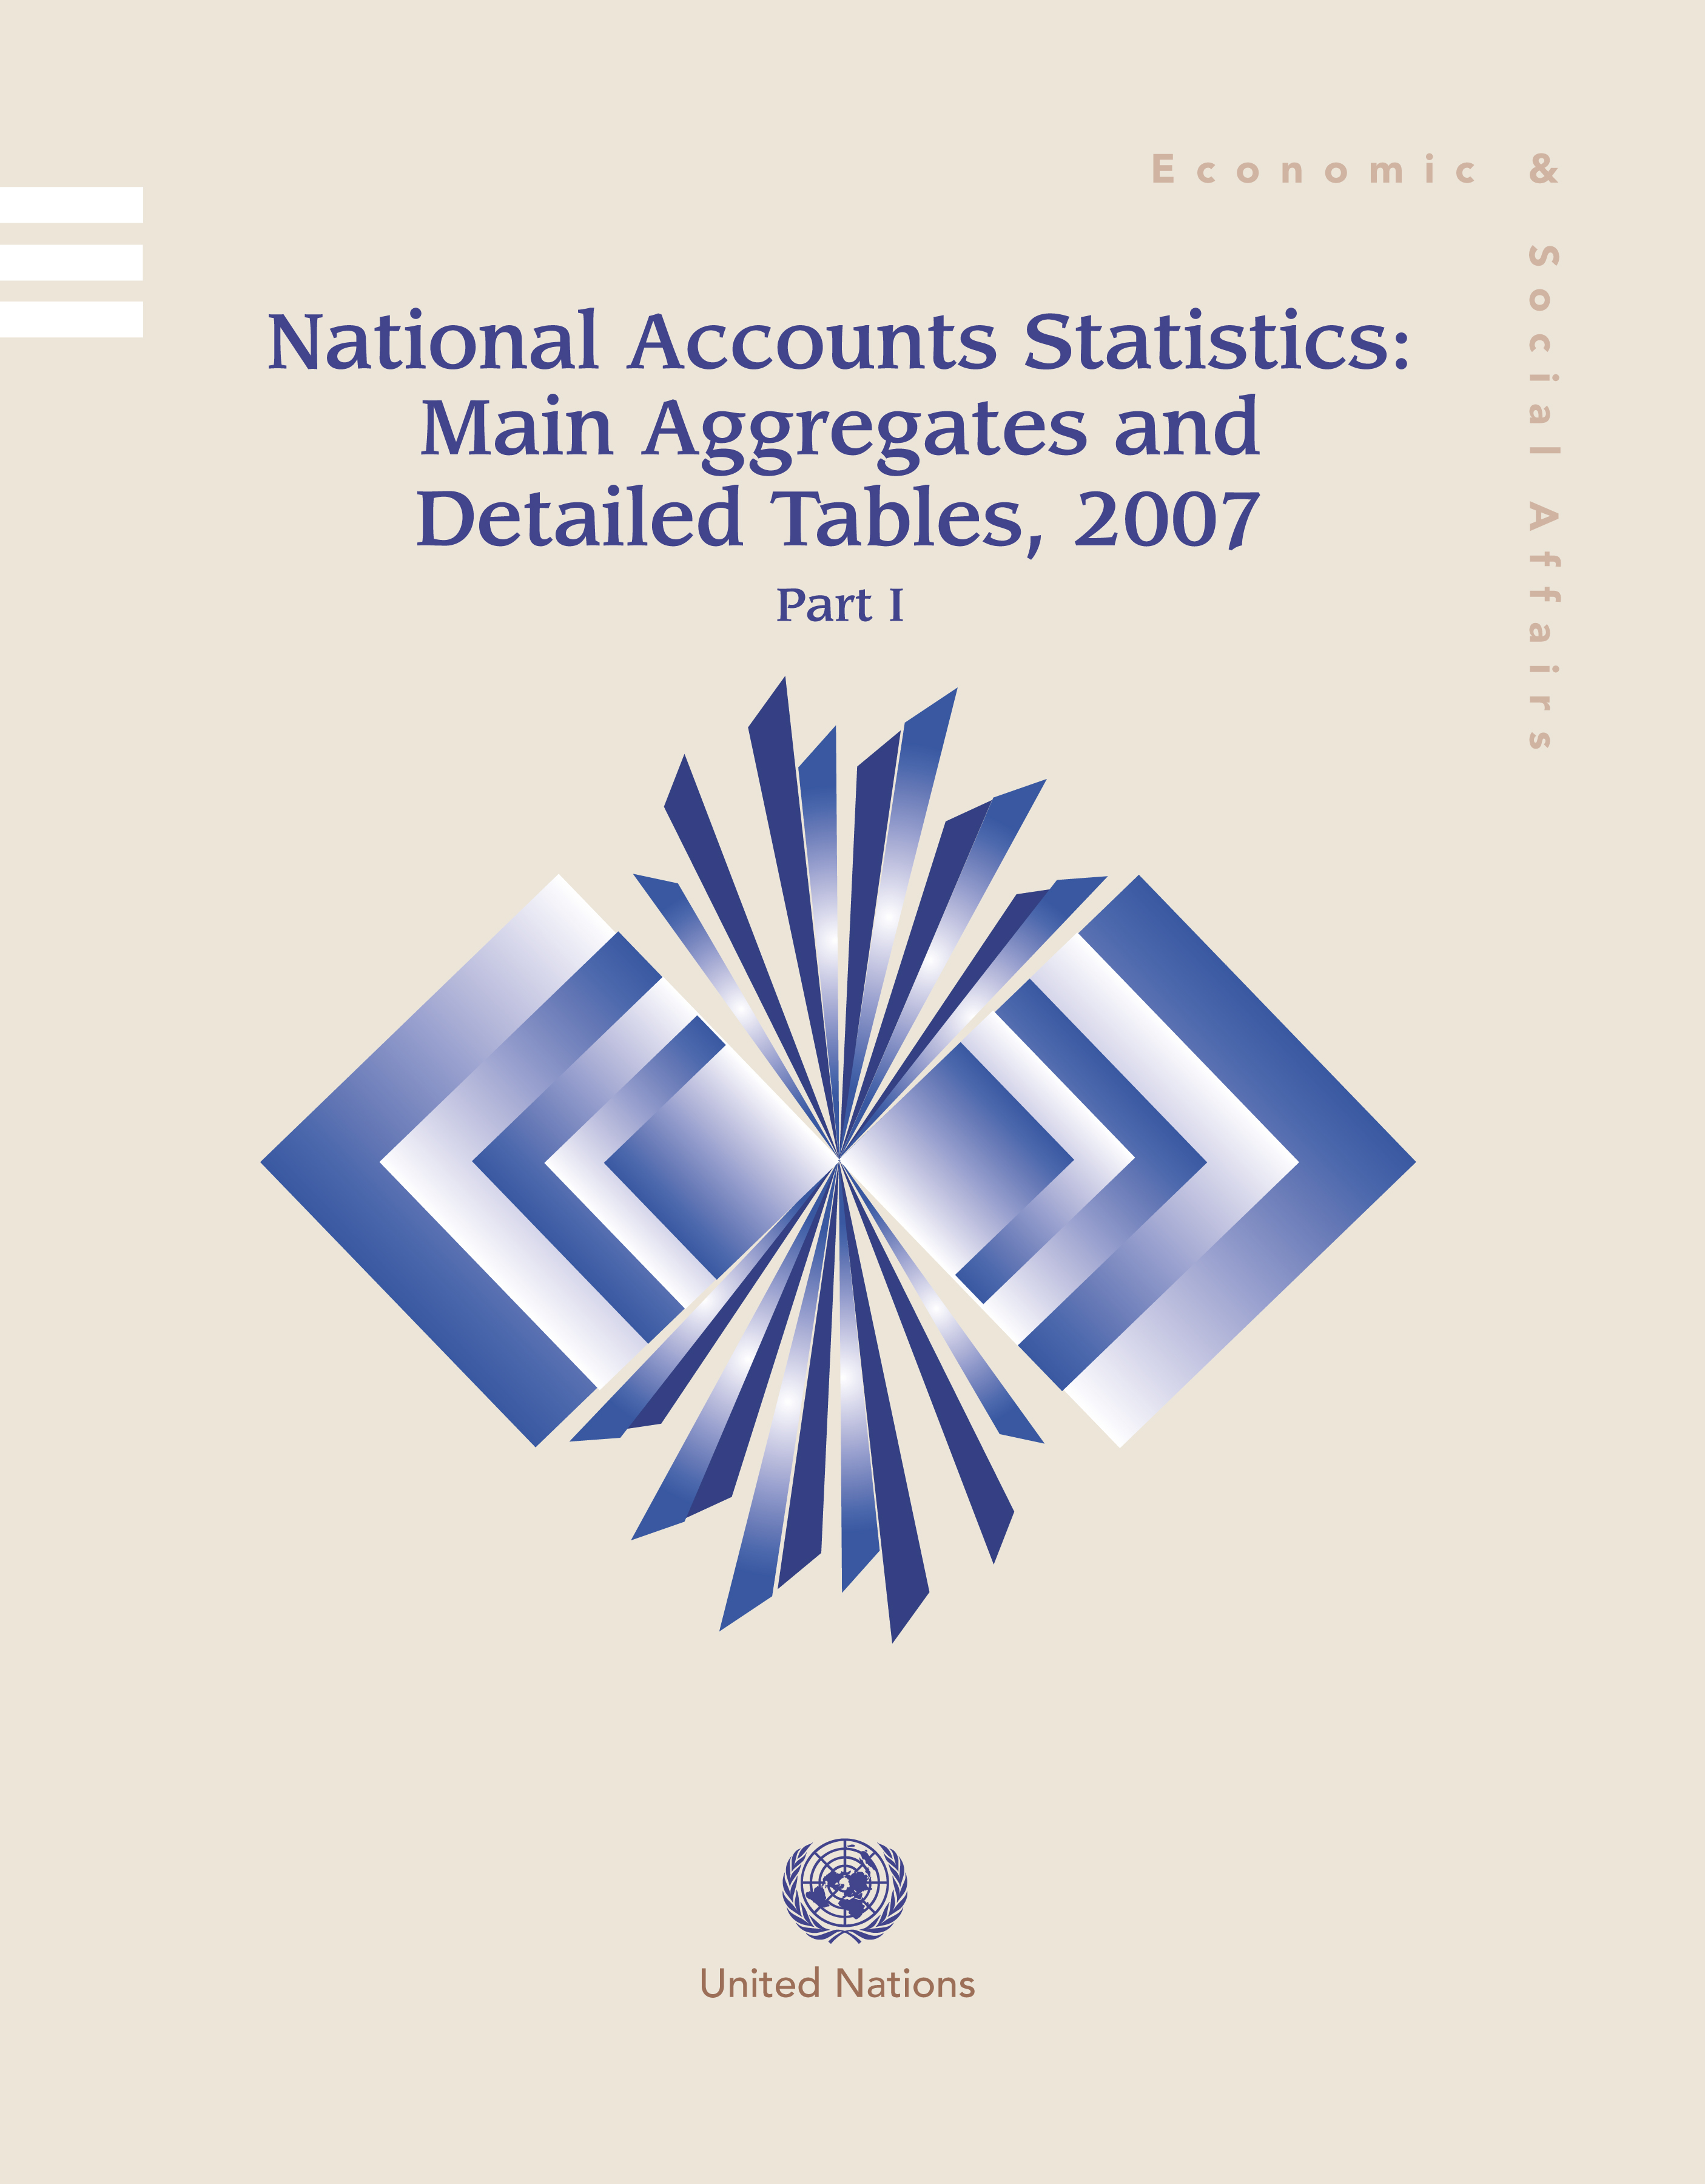 image of National Accounts Statistics: Main Aggregates and Detailed Tables 2007